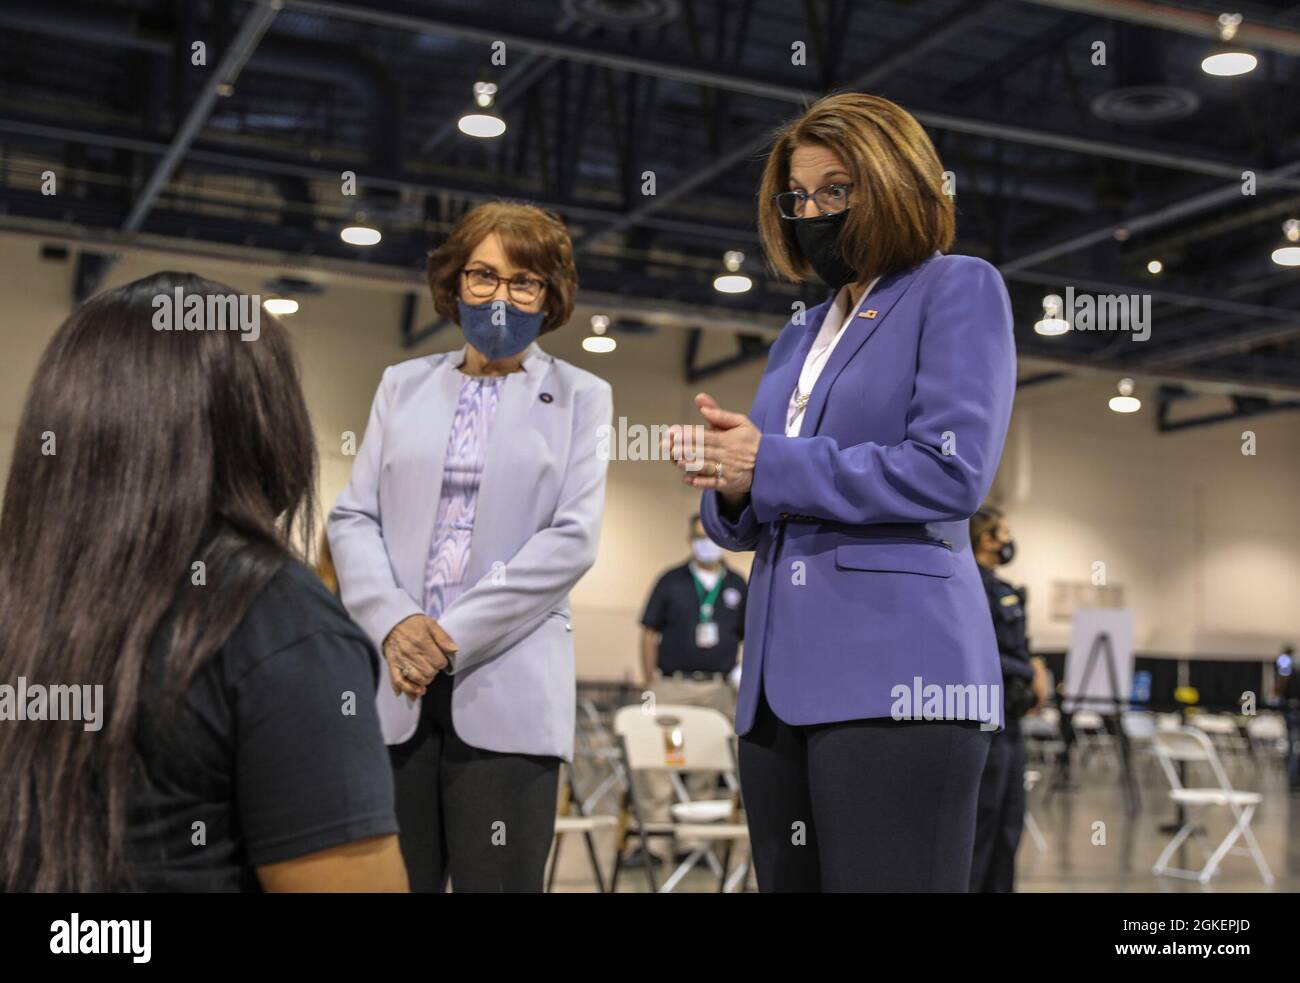 U.S. Senator’s Catherine Cortez Masto (right) and Jacky Rosen talk with local Las Vegans after they received their COVID-19 vaccine at Cashman center, Thursday, Apr. 1, 2021 in Las Vegas, Nevada. Stock Photo